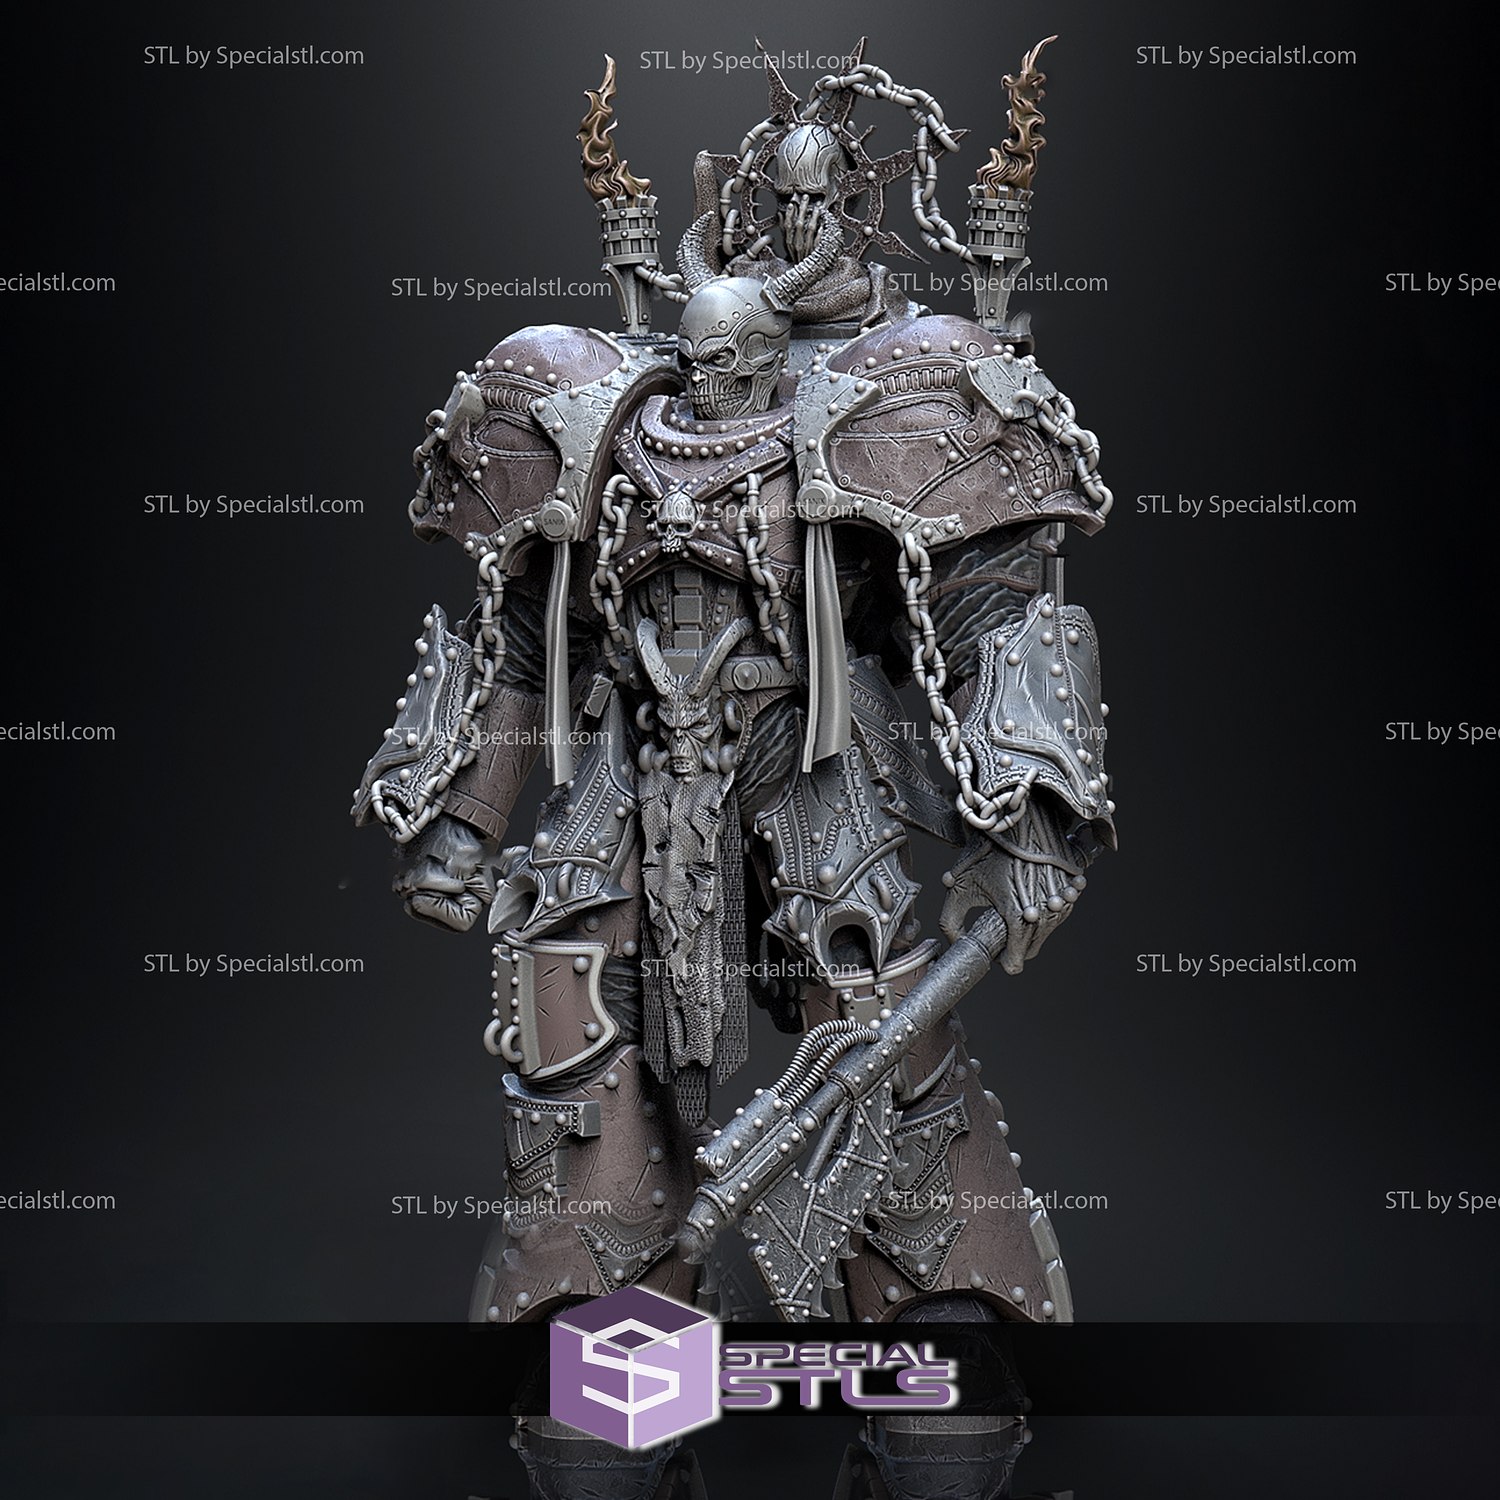 Chaos Colonel Warhammer 40k STL files